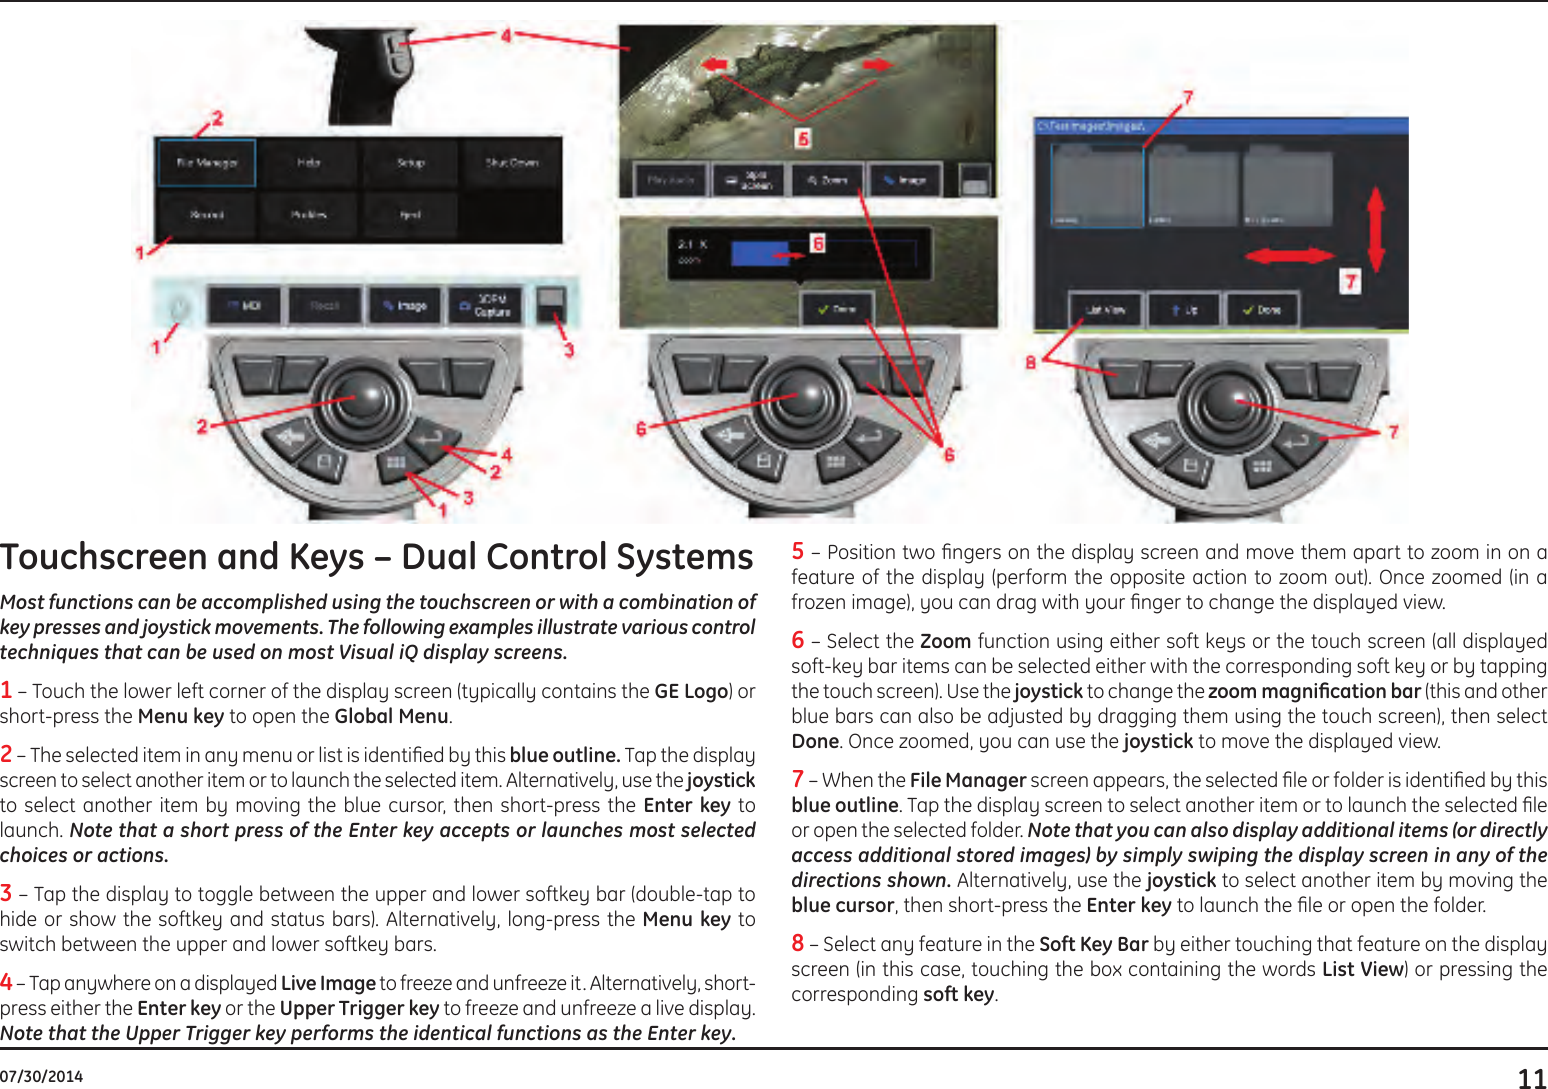 1107/30/2014Touchscreen and Keys – Dual Control Systems Most functions can be accomplished using the touchscreen or with a combination of key presses and joystick movements. The following examples illustrate various control techniques that can be used on most Visual iQ display screens.1 – Touch the lower left corner of the display screen (typically contains the GE Logo) or short-press the Menu key to open the Global Menu.2 – The selected item in any menu or list is identied by this blue outline. Tap the display screen to select another item or to launch the selected item. Alternatively, use the joystick to select another item by moving the blue cursor, then short-press the Enter key to launch. Note that a short press of the Enter key accepts or launches most selected choices or actions. 3 – Tap the display to toggle between the upper and lower softkey bar (double-tap to hide or show the softkey and status bars). Alternatively, long-press the Menu key to switch between the upper and lower softkey bars. 4 – Tap anywhere on a displayed Live Image to freeze and unfreeze it. Alternatively, short-press either the Enter key or the Upper Trigger key to freeze and unfreeze a live display. Note that the Upper Trigger key performs the identical functions as the Enter key. 5 – Position two ngers on the display screen and move them apart to zoom in on a feature of the display (perform the opposite action to zoom out). Once zoomed (in a  frozen image), you can drag with your nger to change the displayed view. 6 – Select the Zoom function using either soft keys or the touch screen (all displayed soft-key bar items can be selected either with the corresponding soft key or by tapping the touch screen). Use the joystick to change the zoommagnicationbar (this and other blue bars can also be adjusted by dragging them using the touch screen), then select Done. Once zoomed, you can use the joystick to move the displayed view.7 – When the File Manager screen appears, the selected le or folder is identied by this blue outline. Tap the display screen to select another item or to launch the selected le or open the selected folder. Note that you can also display additional items (or directly access additional stored images) by simply swiping the display screen in any of the directions shown. Alternatively, use the joystick to select another item by moving the blue cursor, then short-press the Enter key to launch the le or open the folder.8 – Select any feature in the Soft Key Bar by either touching that feature on the display screen (in this case, touching the box containing the words List View) or pressing the corresponding soft key.